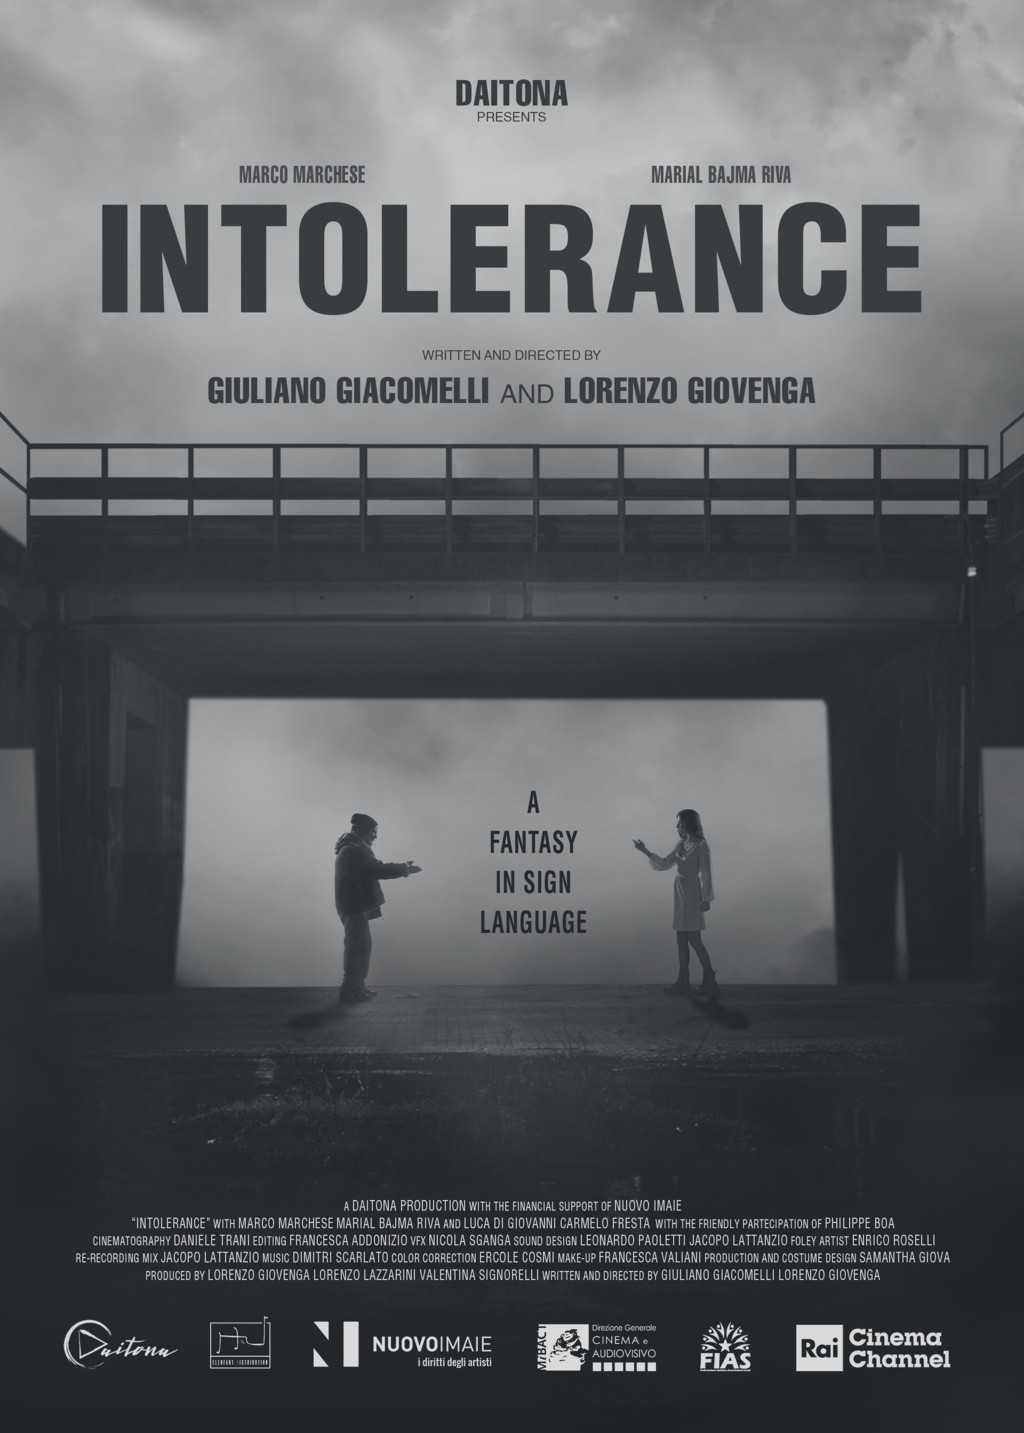 Intolerance<h3 style="font-size:10px; line-height:20px;">di Giuliano Giacomelli & Lorenzo Giovenga</h3>